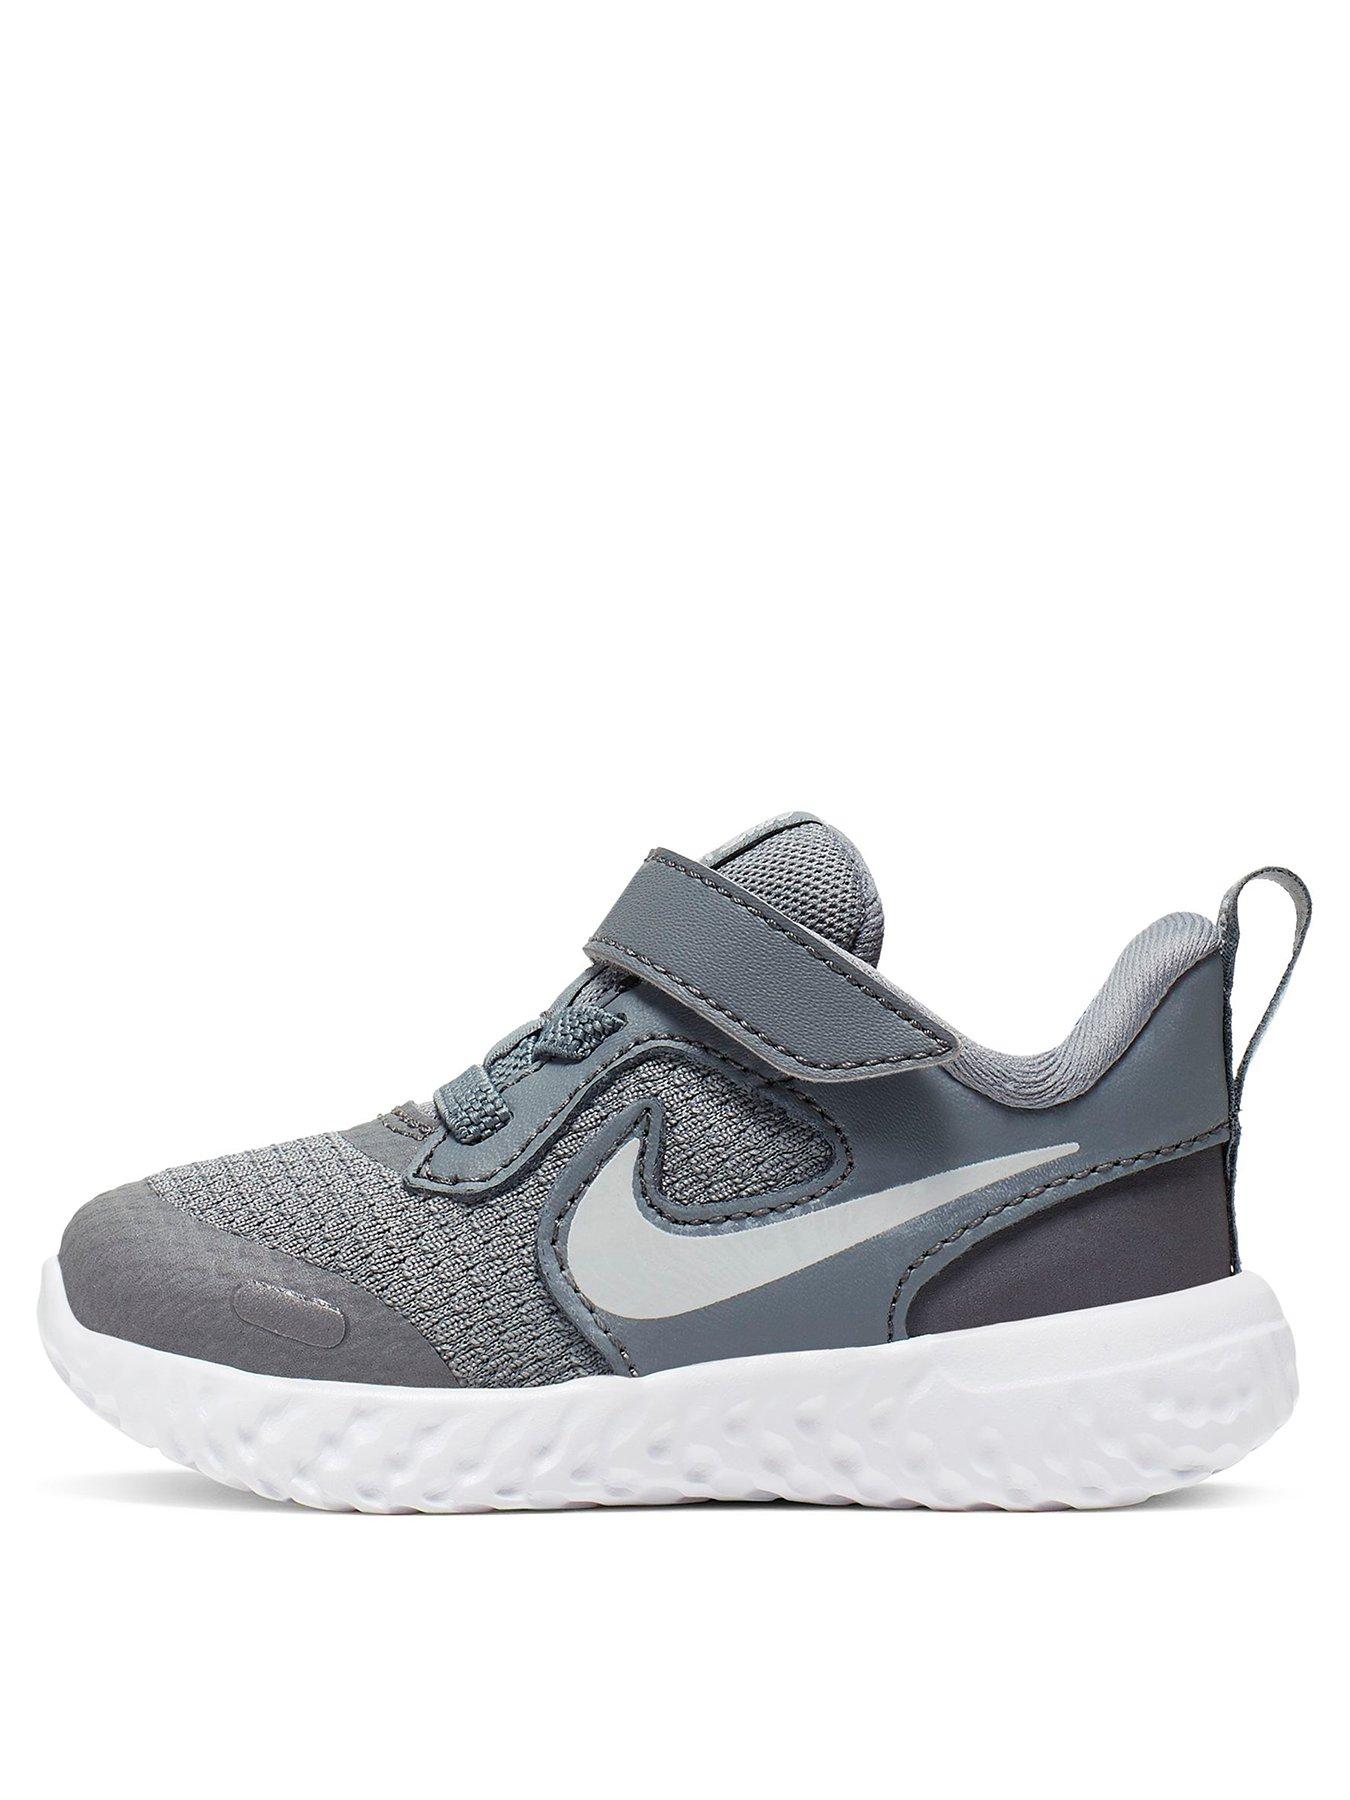 grey nike infant trainers